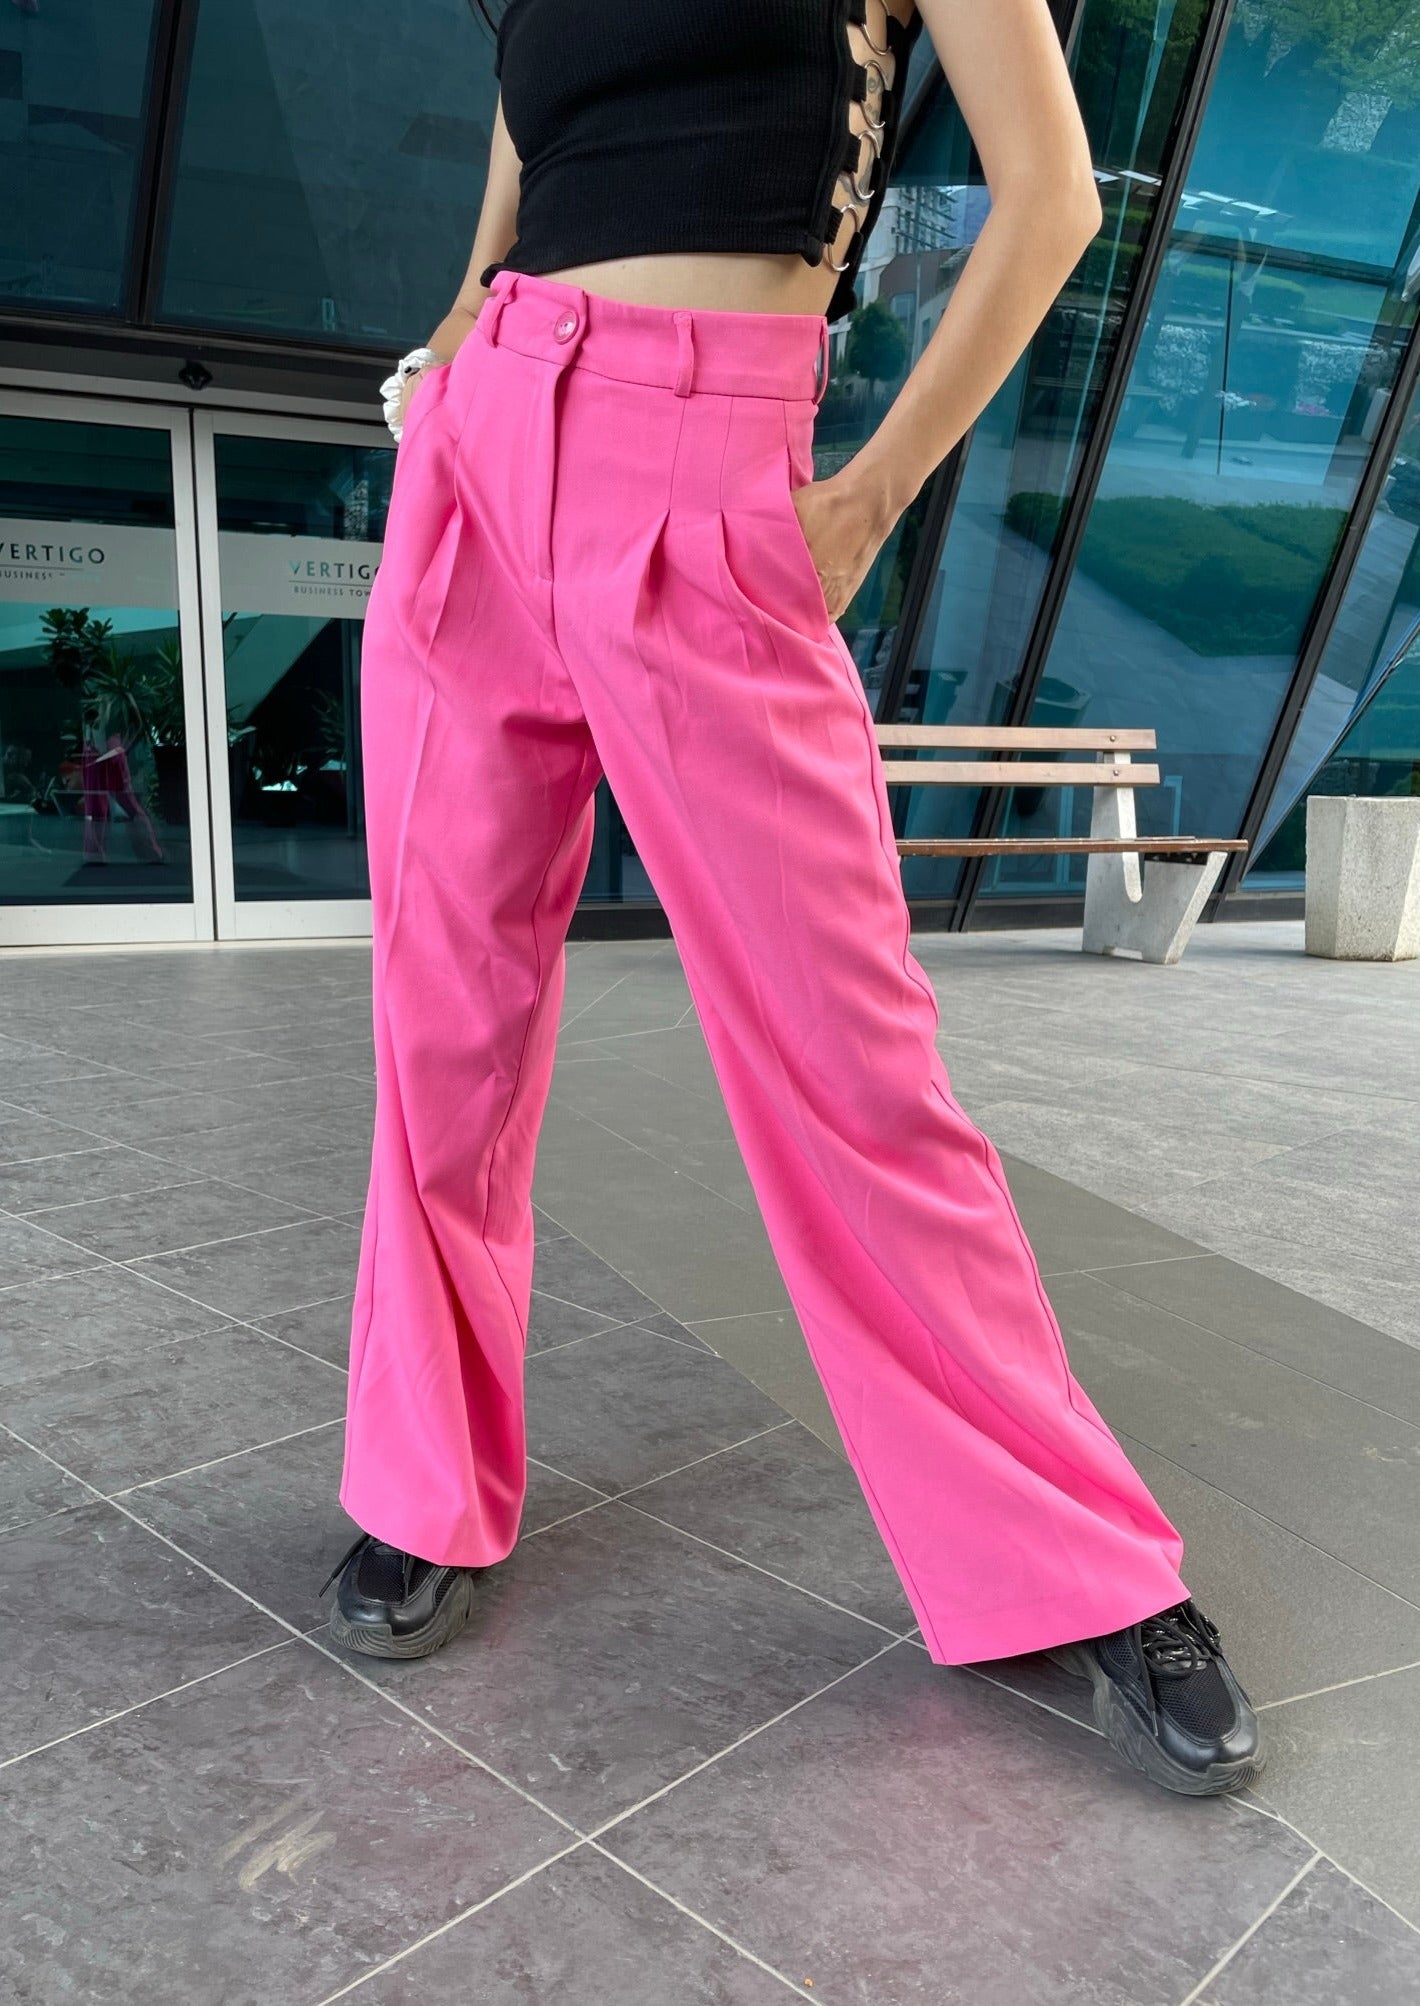 Style 101 // What Wide Leg Pants Are Good For! - PinkGrasshopper.